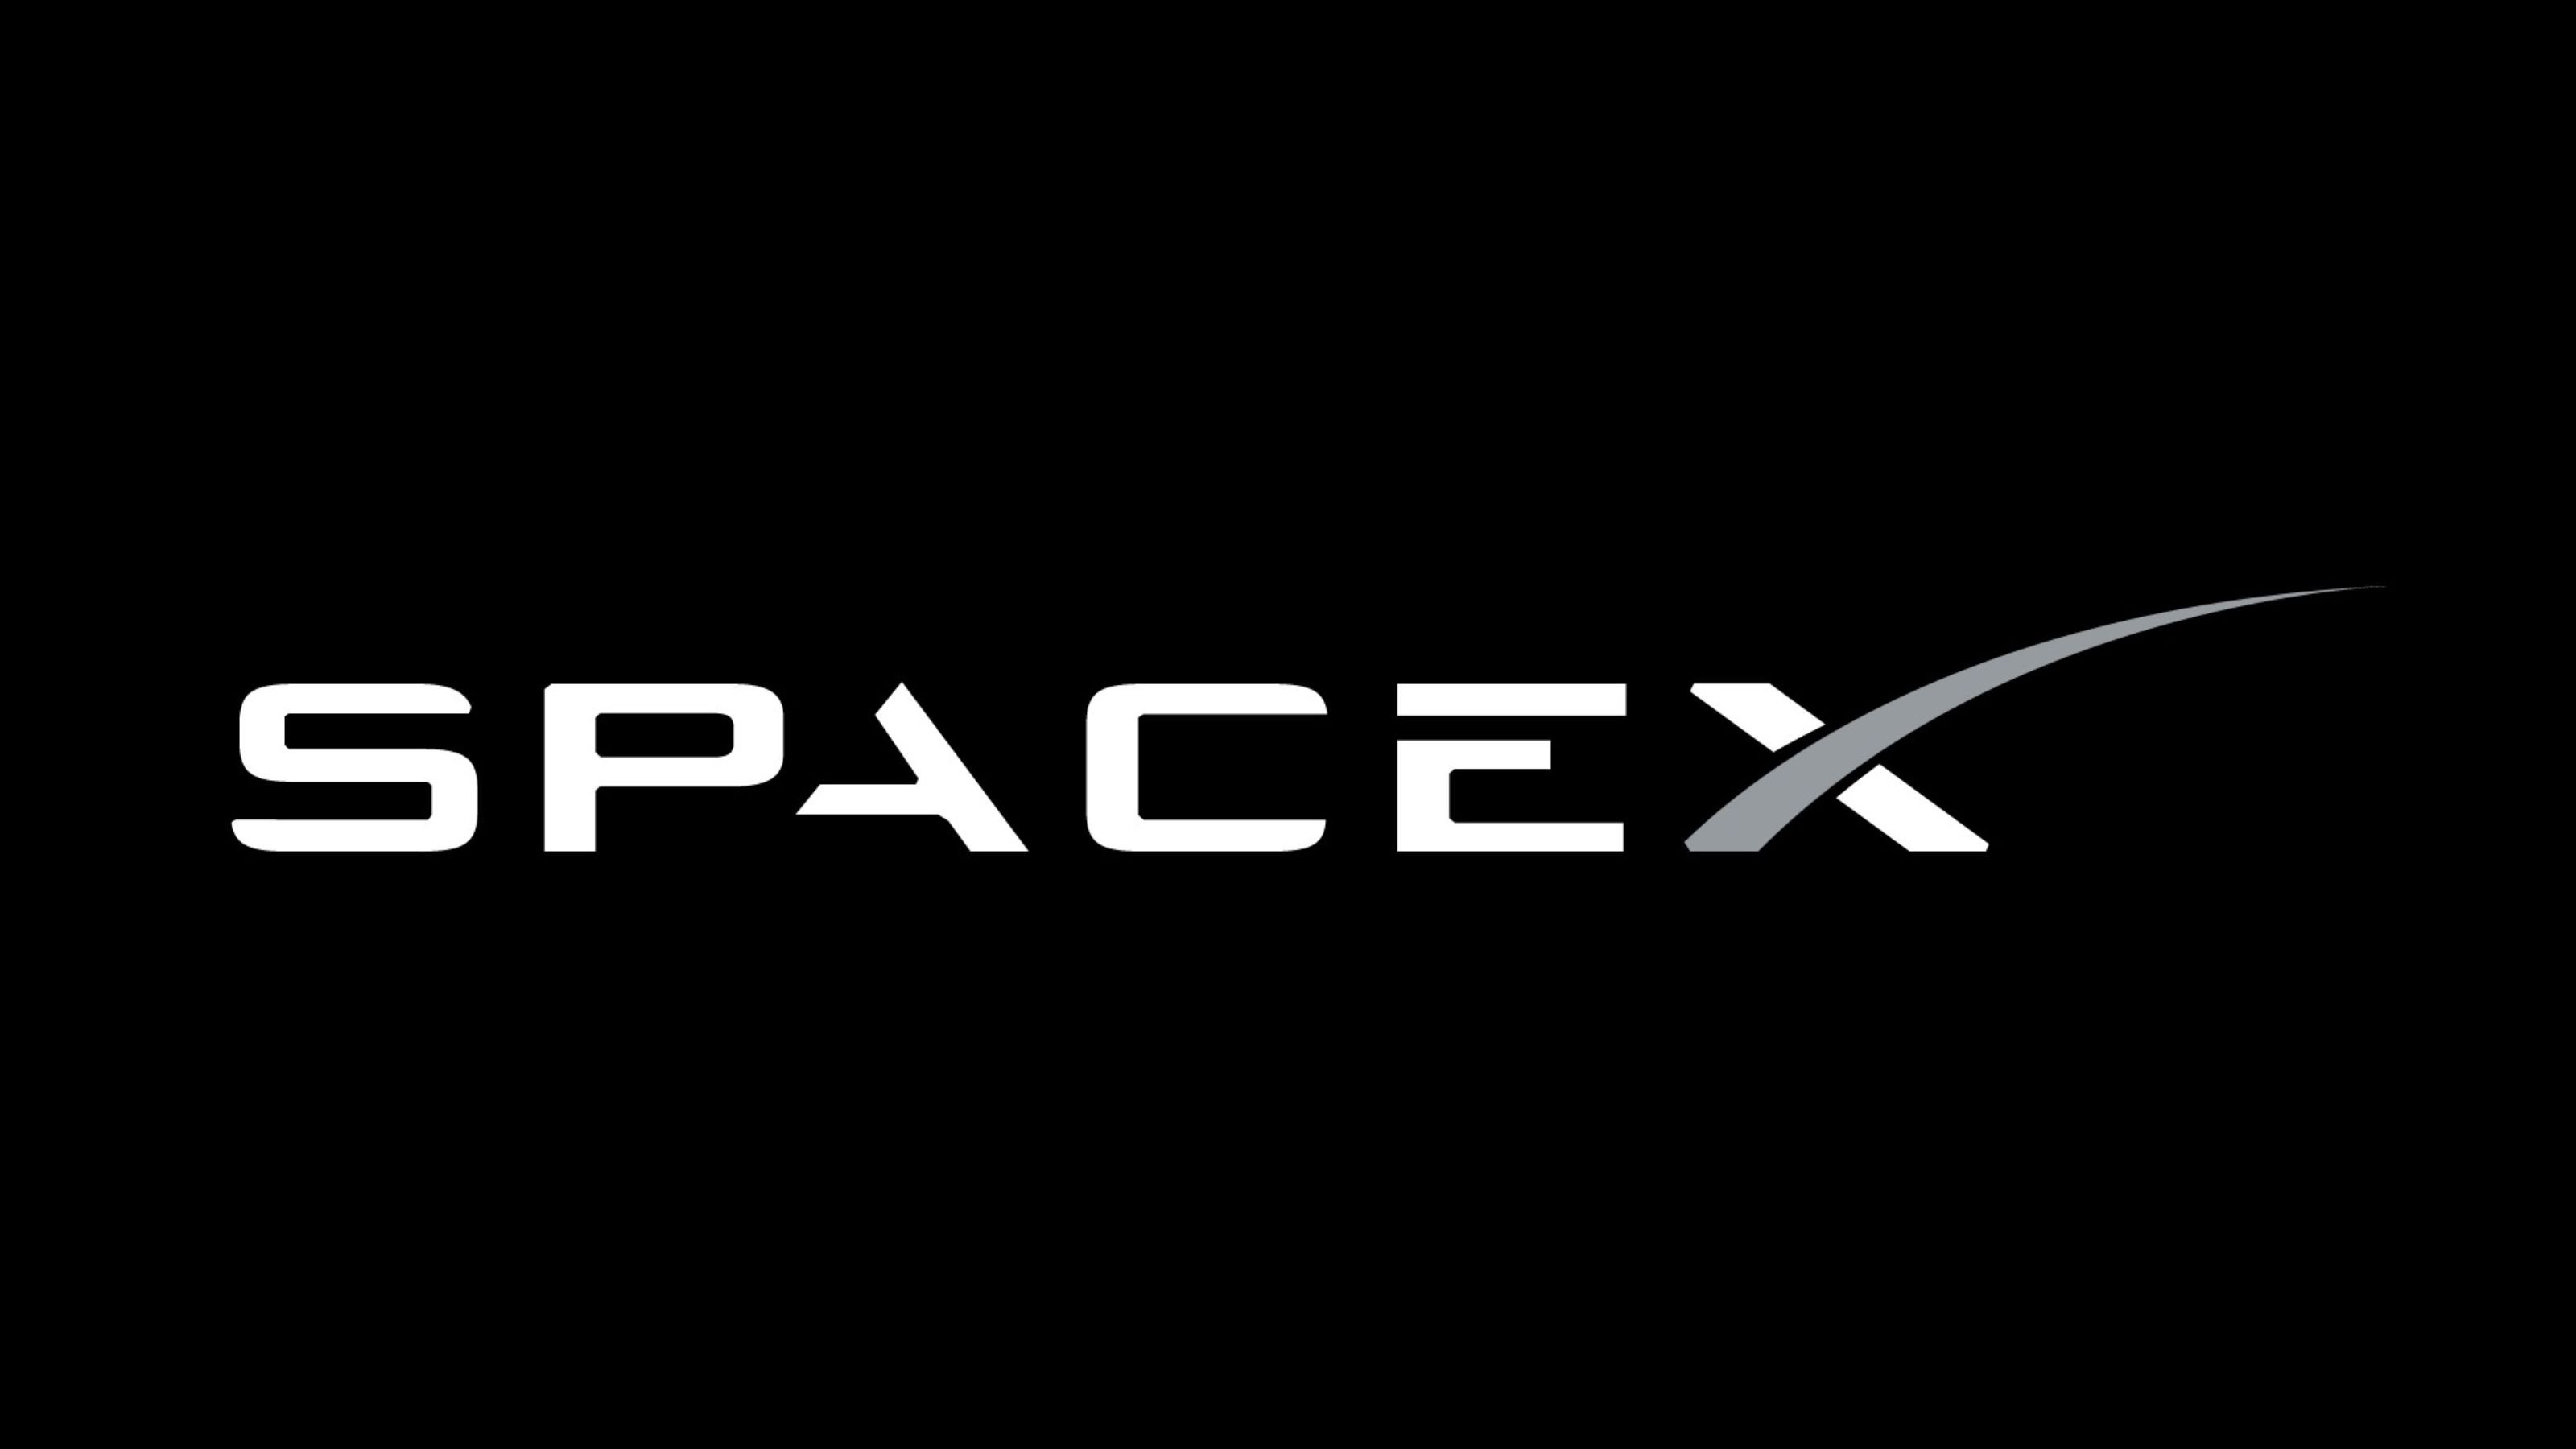 Spacex Logo Wallpaper 59810 61599 Hd Wallpapers - Spacex , HD Wallpaper & Backgrounds